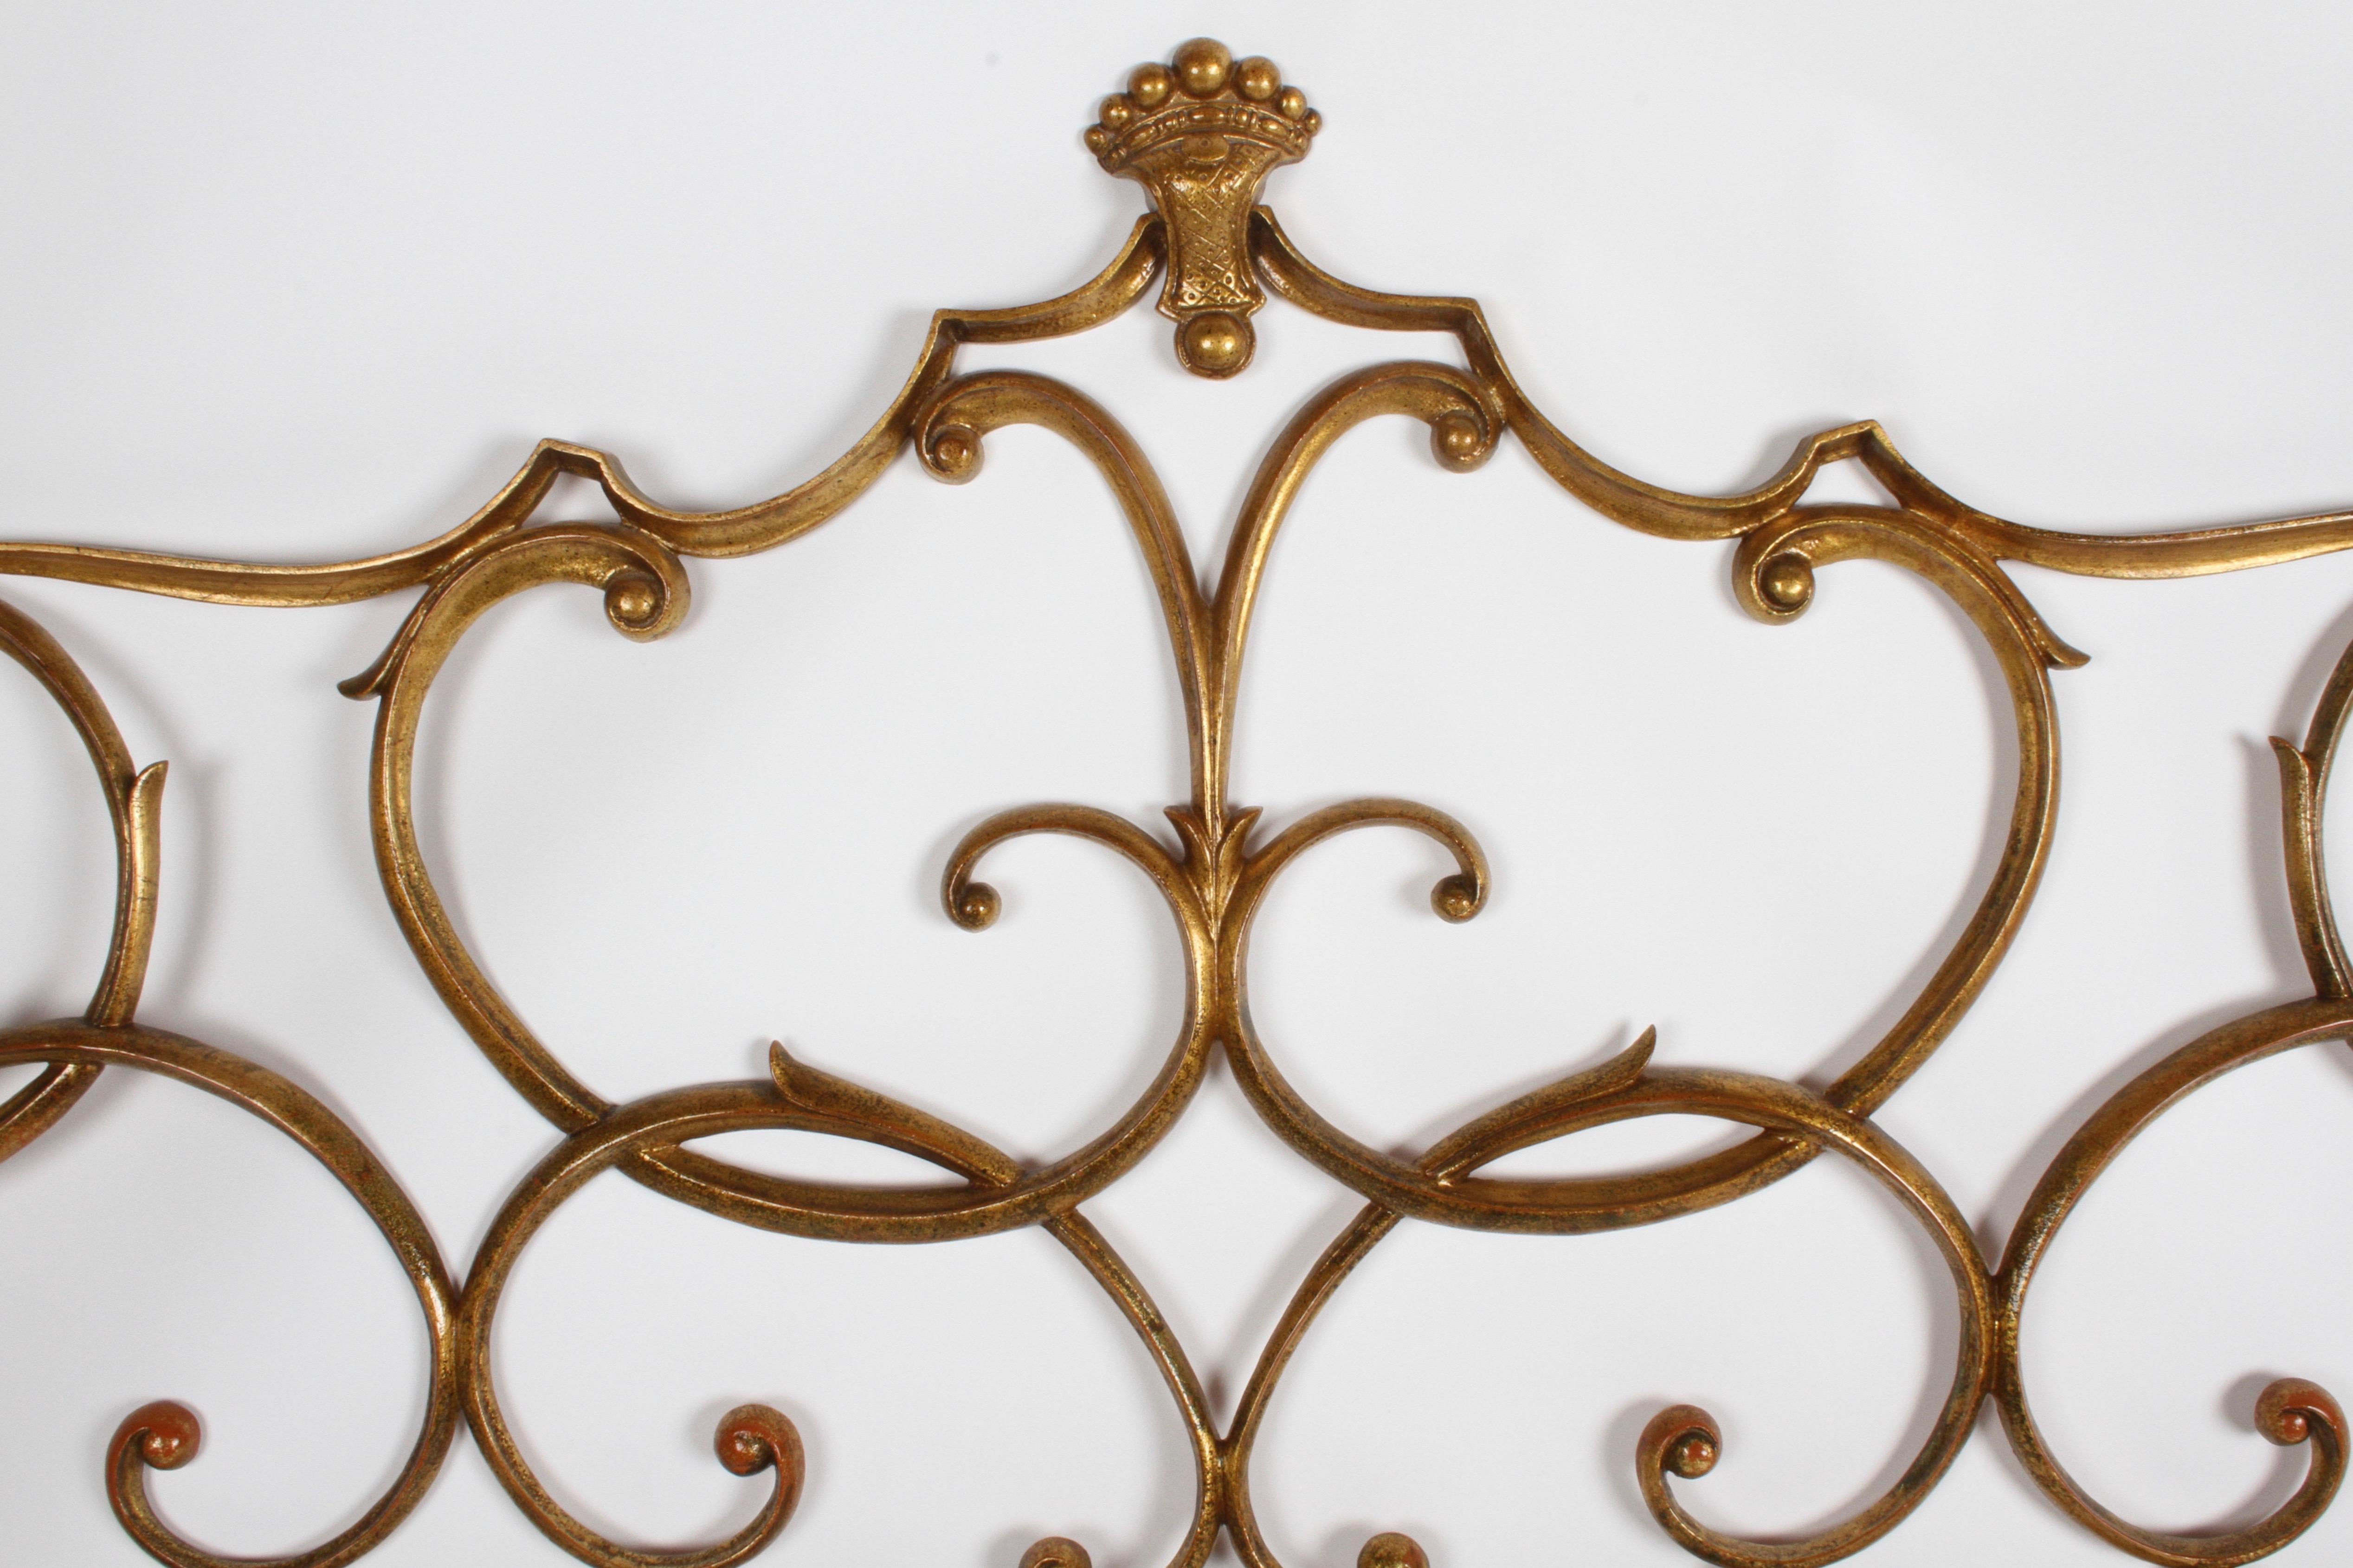 Very Hollywood Regency, Italian Rococo style King headboard with gold gilt. Cast metal, appears to have original gold paint over orange, made in Italy. In very nice condition, very little wear, no breaks. Glamorous!! Mounting hardware is 75.5